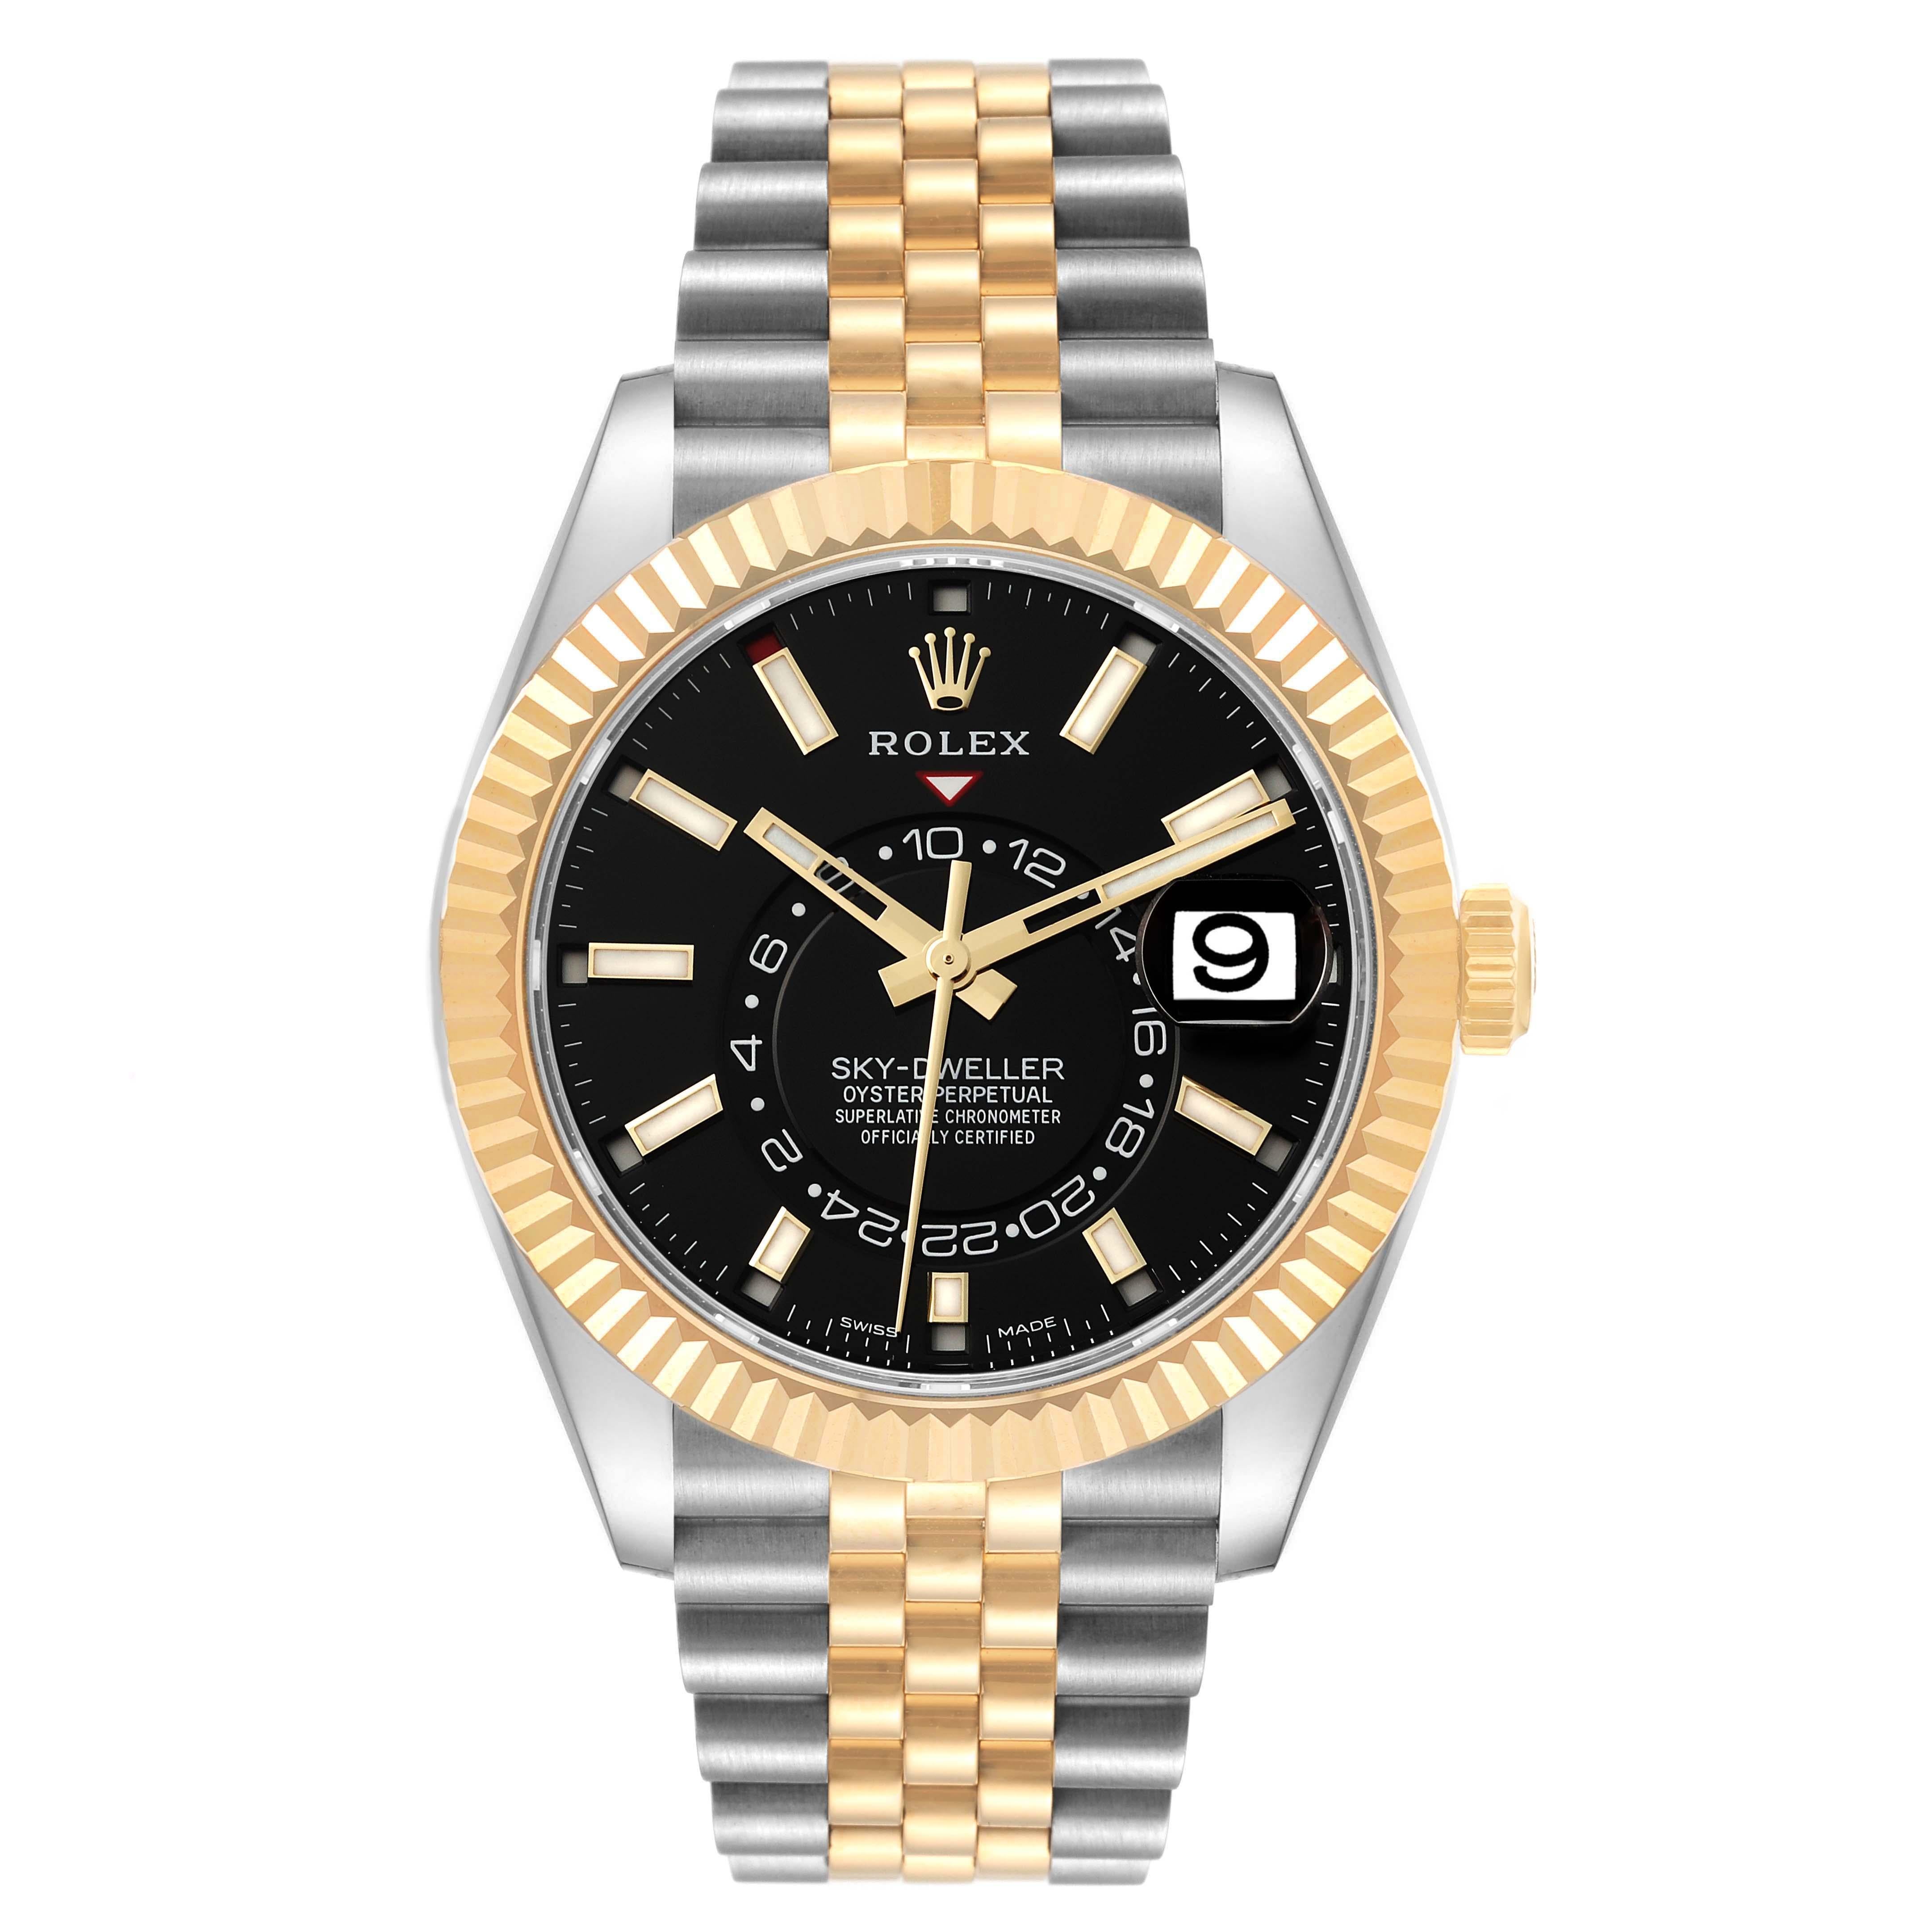 Rolex Sky Dweller Steel Yellow Gold Black Dial Mens Watch 326933 Box Card. Officially certified chronometer automatic self-winding movement. Dual time zones, annual calendar. Paramagnetic blue Parachrom hairspring. High-performance Paraflex shock